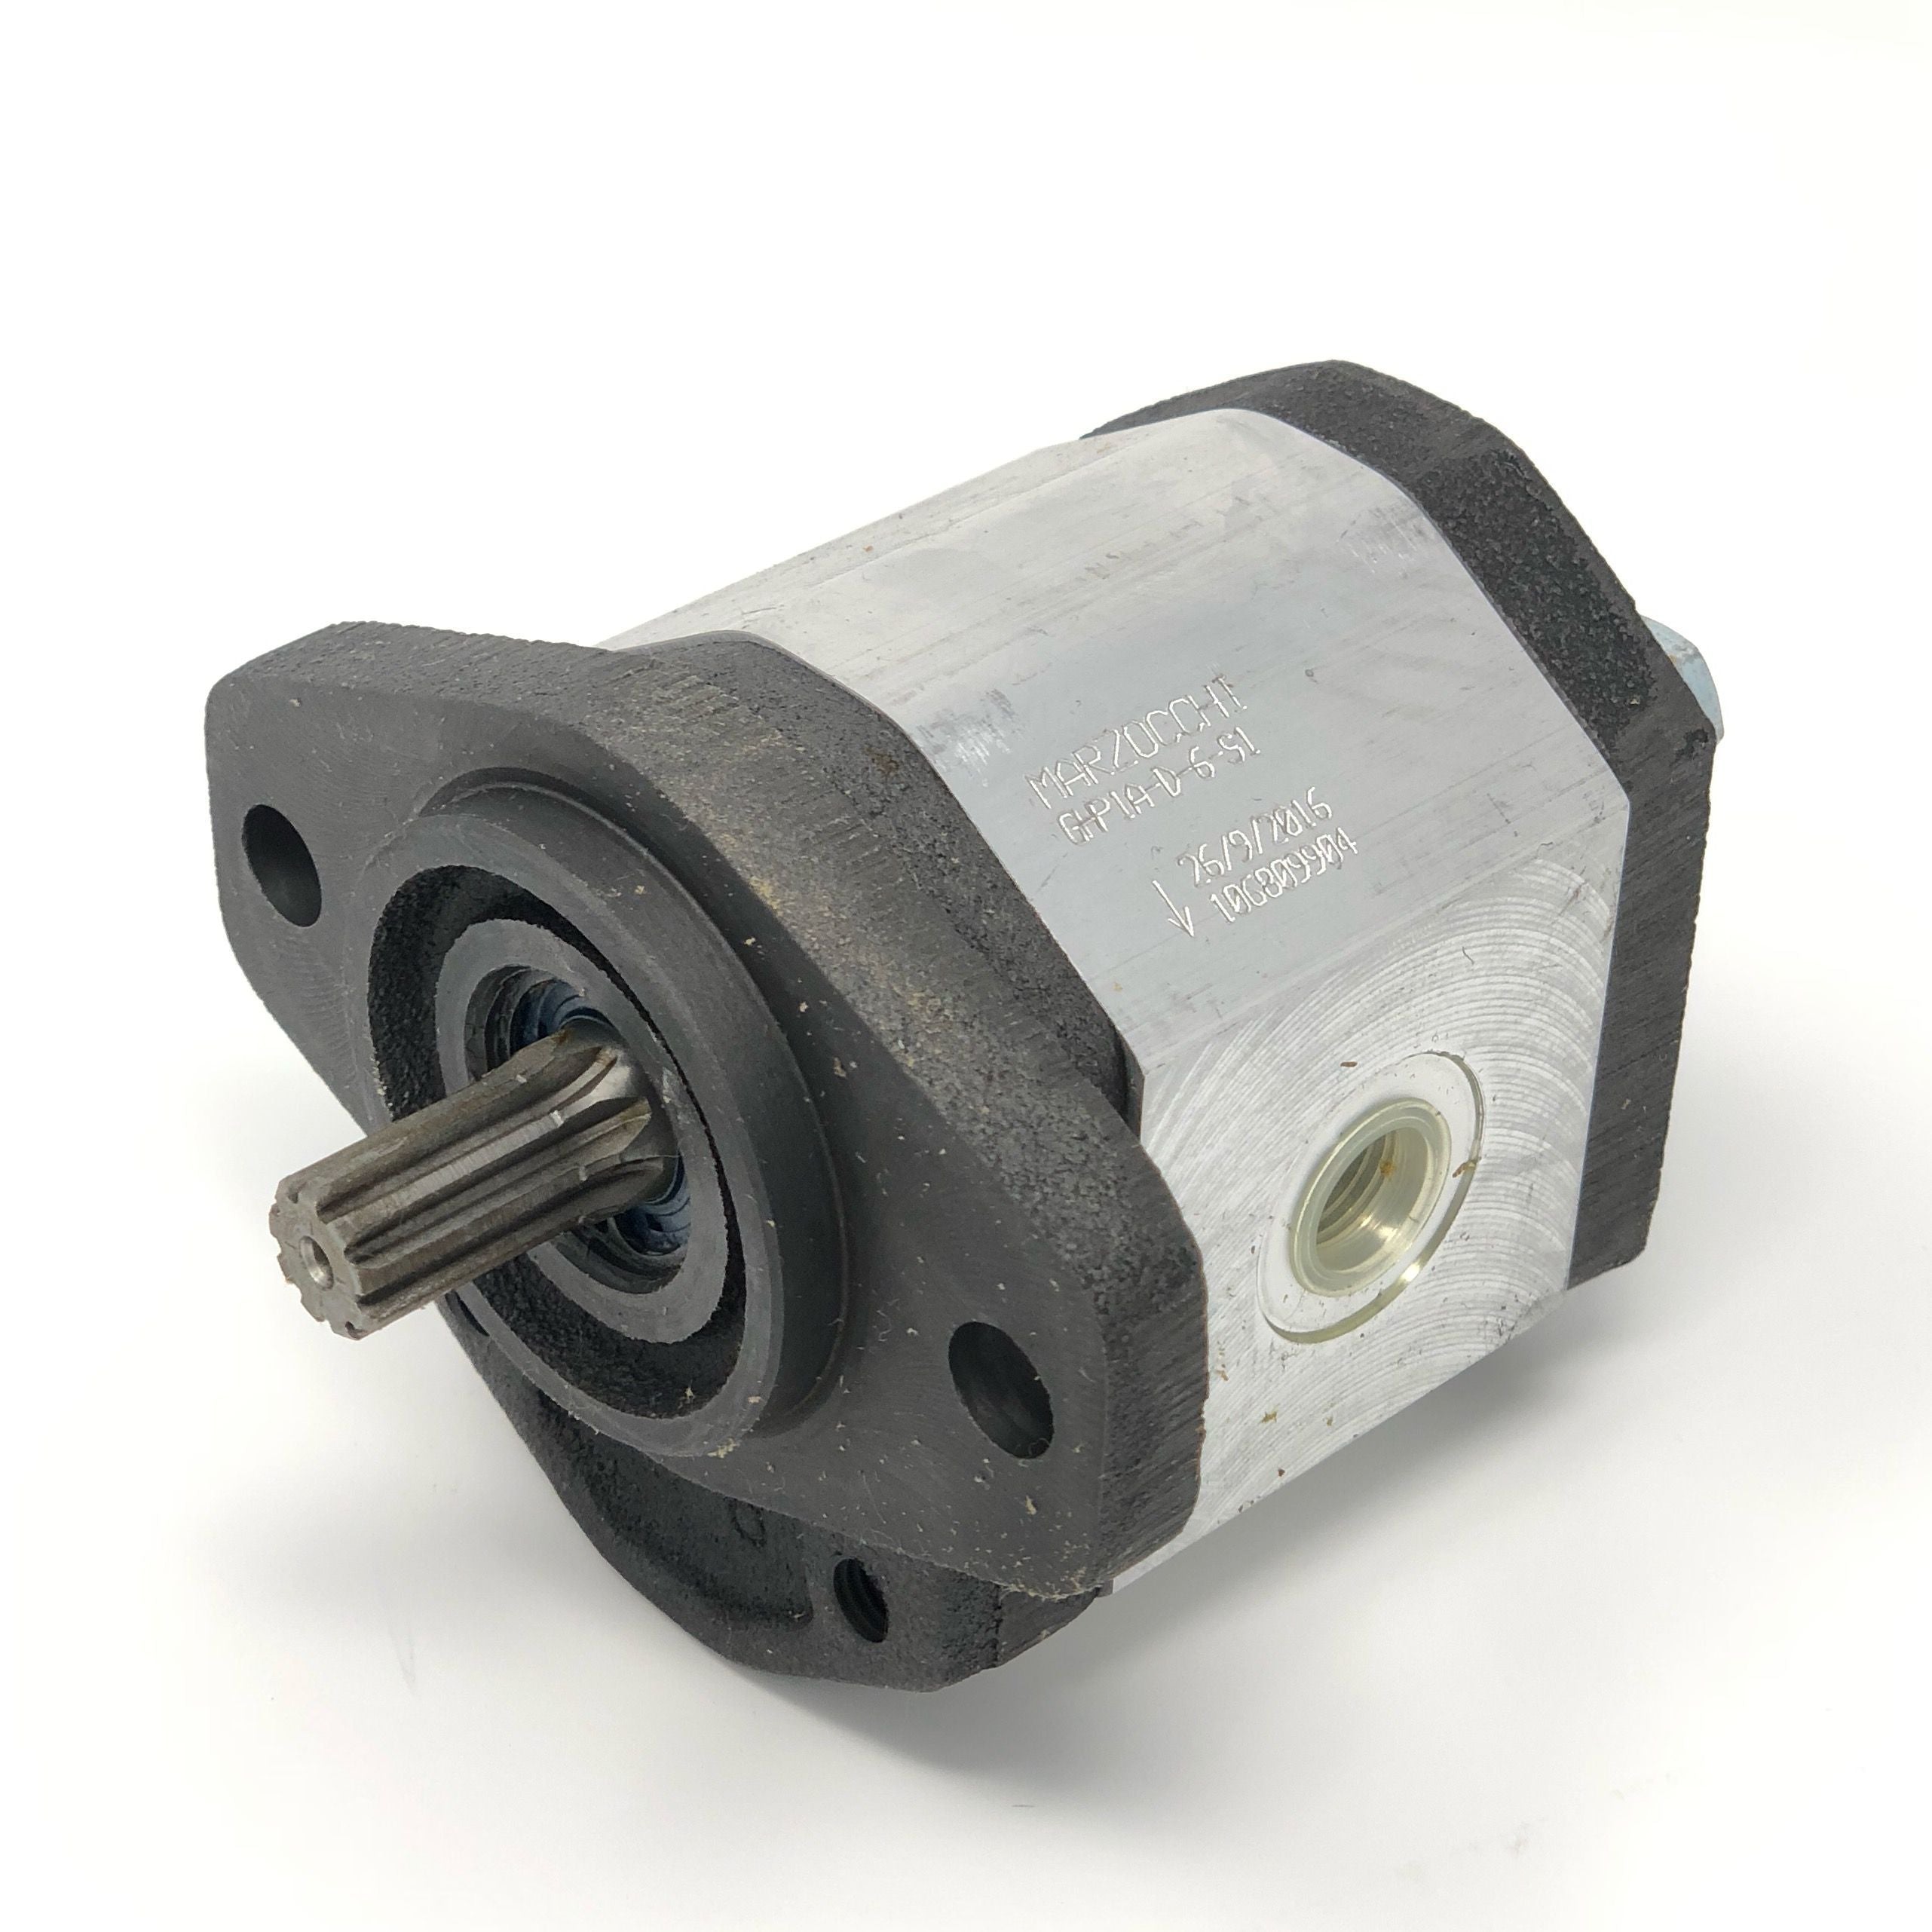 GHP1A-D-7-S1 : Marzocchi Gear Pump, CW, 5.2cc (0.3172in3), 2.47 GPM, 3770psi, 3500 RPM, #8 SAE (1/2") In, #6 SAE (3/8") Out, Splined Shaft 9T 20/40DP, SAE AA 2-Bolt Mount